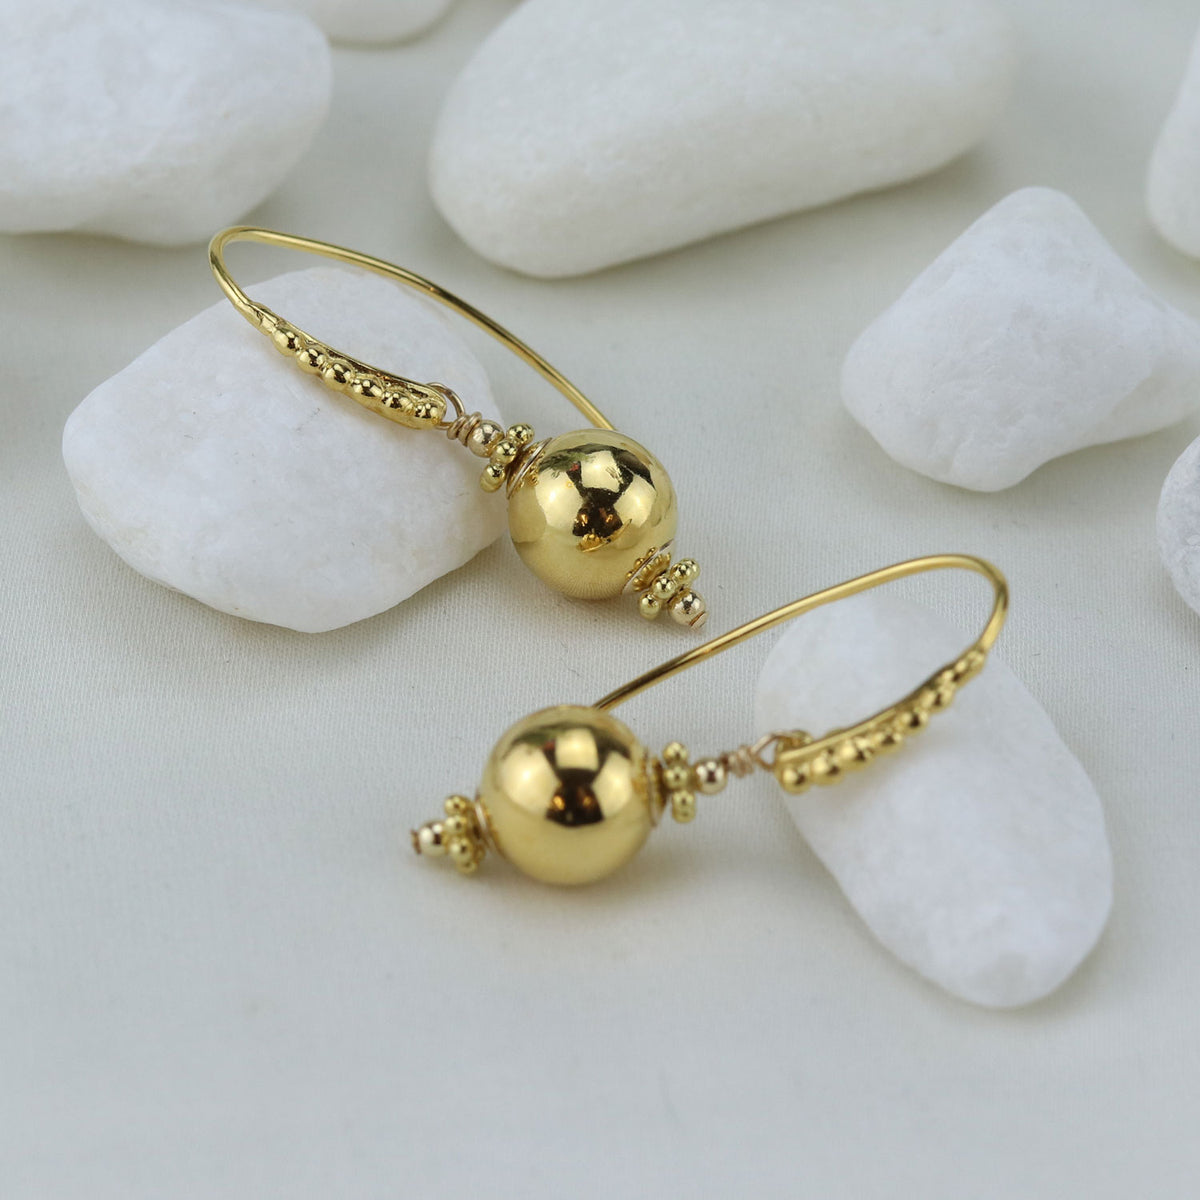 Ornate Fish Hook Earrings 18ct Gold Plated